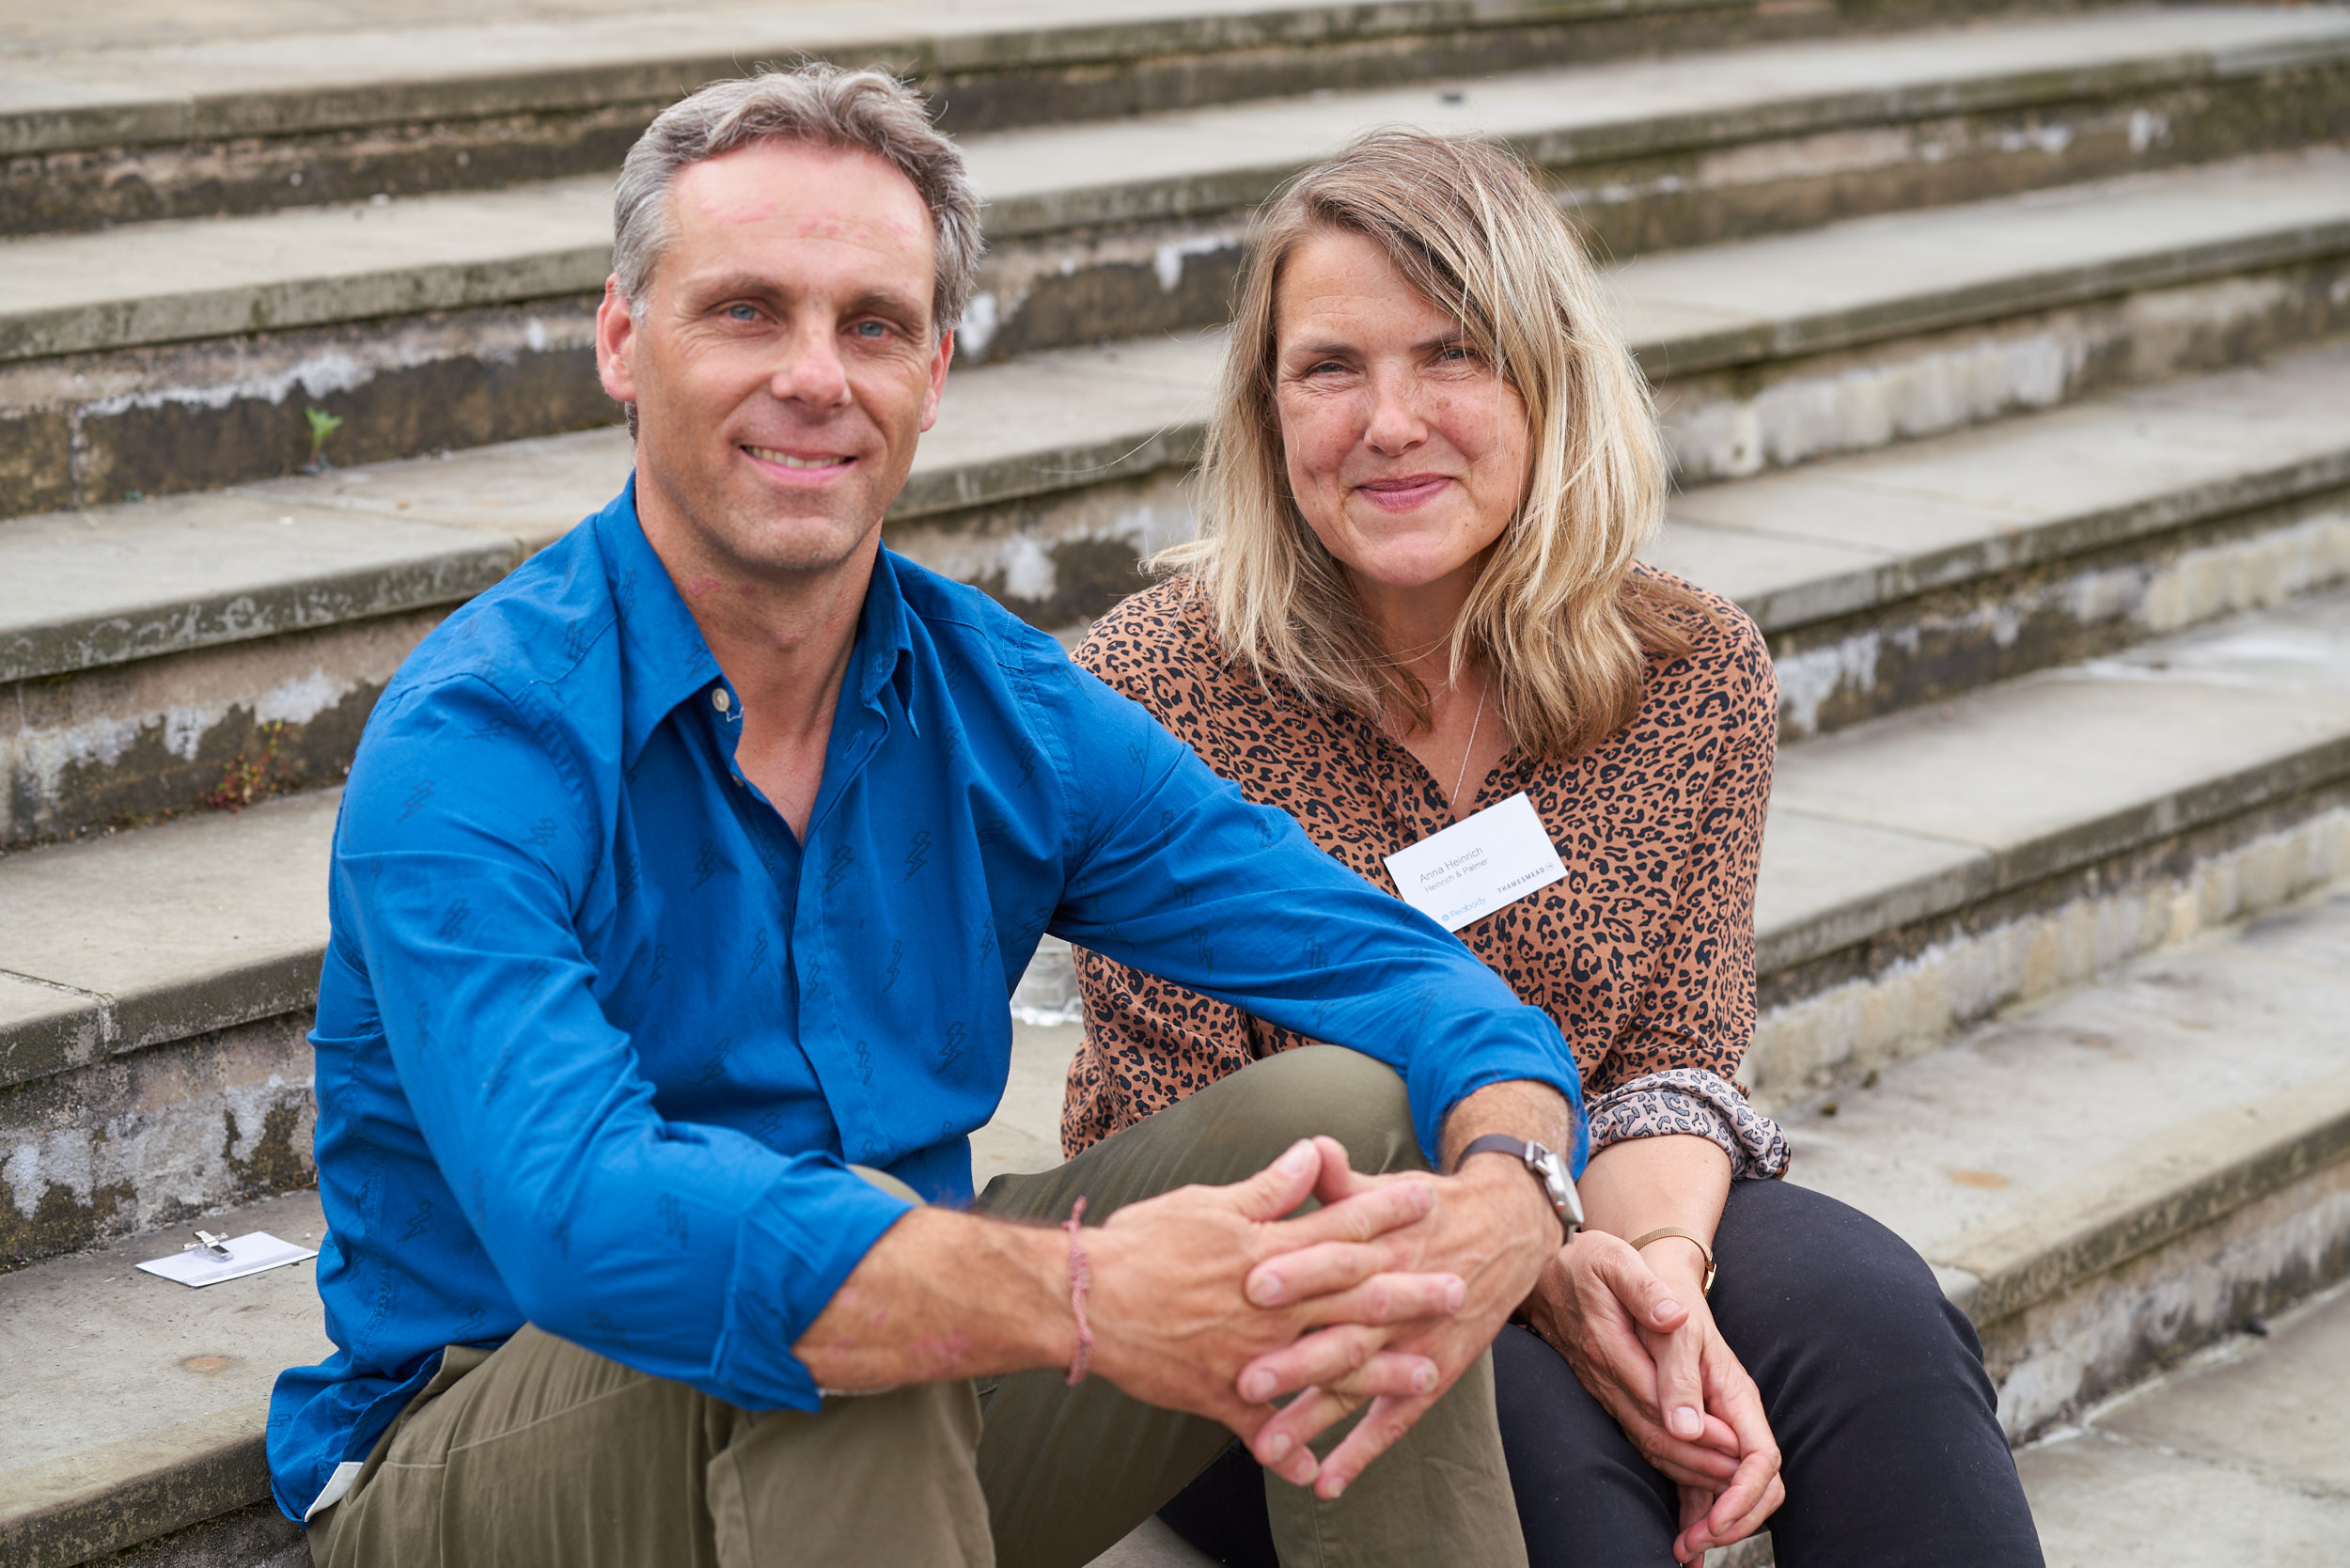 A photo of two people one male and one female. Sitting next to each other on some steps, they are smiling and looking towards the camera. The man is wearing a blue shirt, he has short light coloured hair and the woman is wearing a brown patterned shirts she has shoulder length blonde hair.